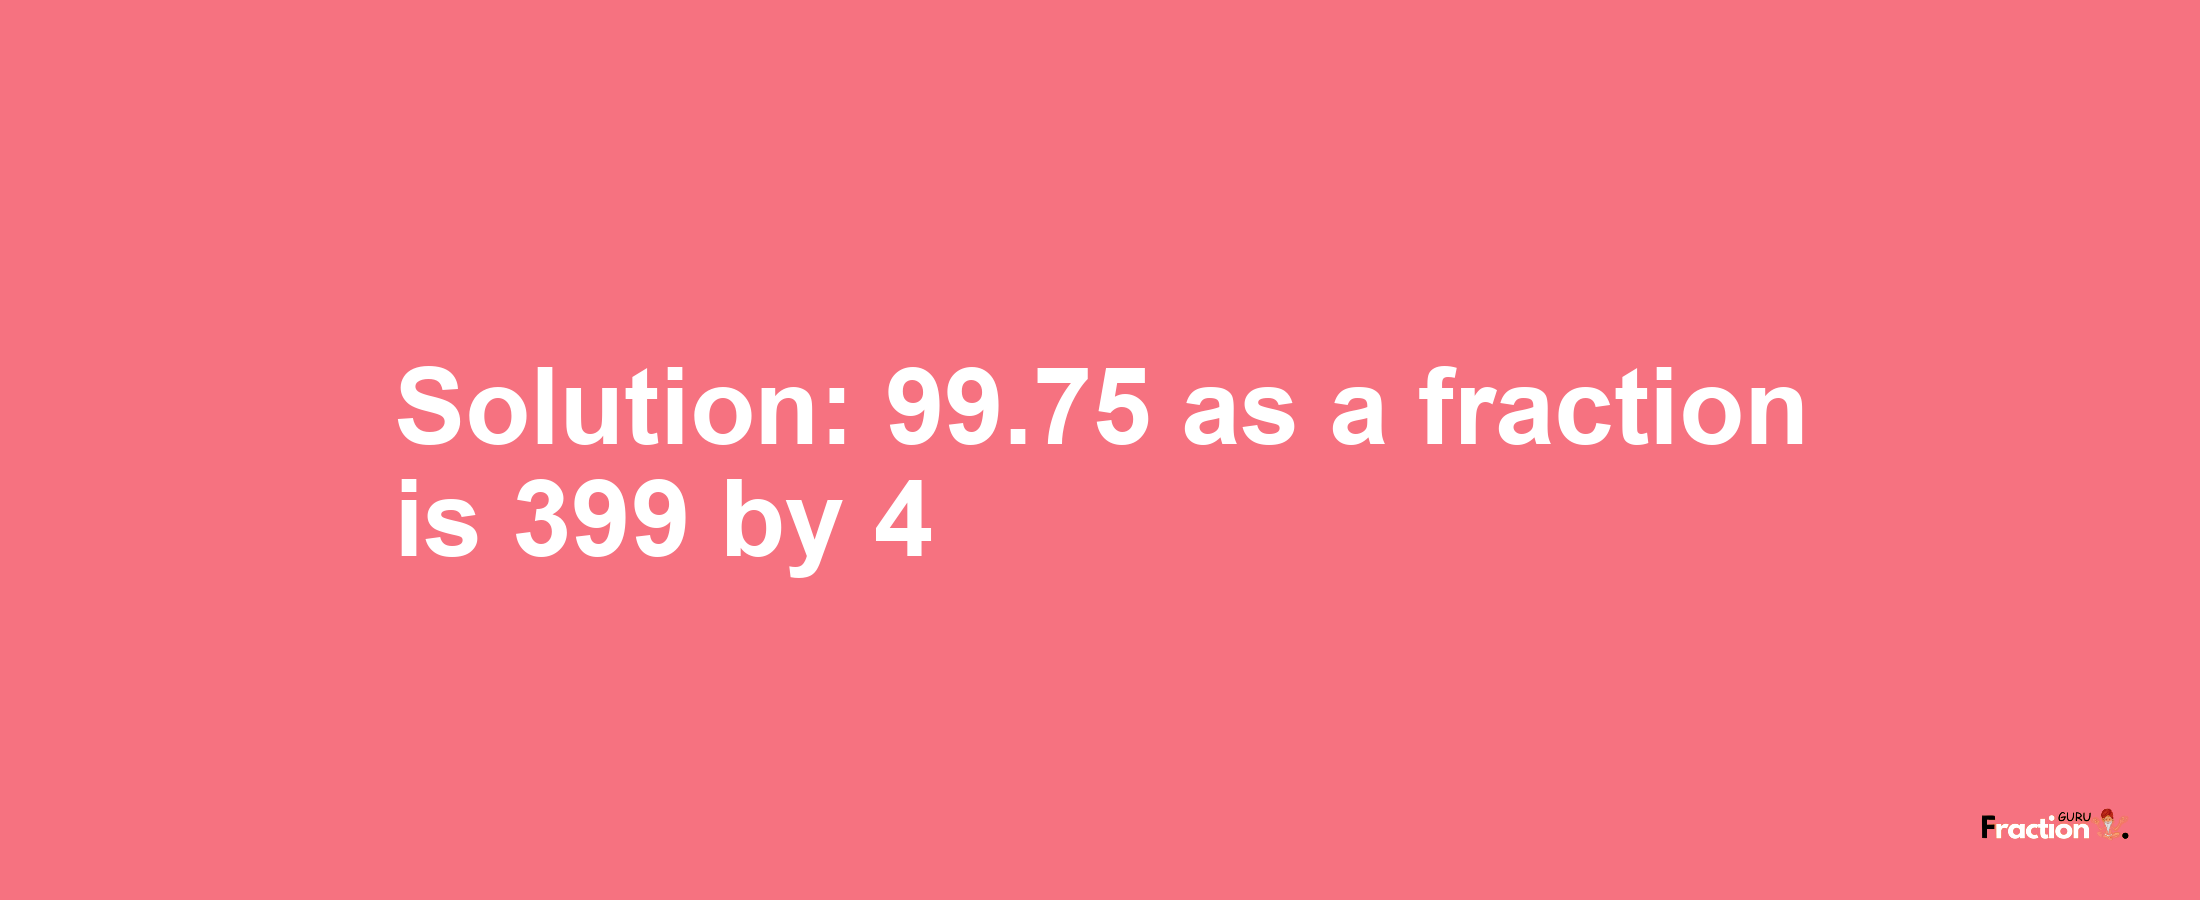 Solution:99.75 as a fraction is 399/4